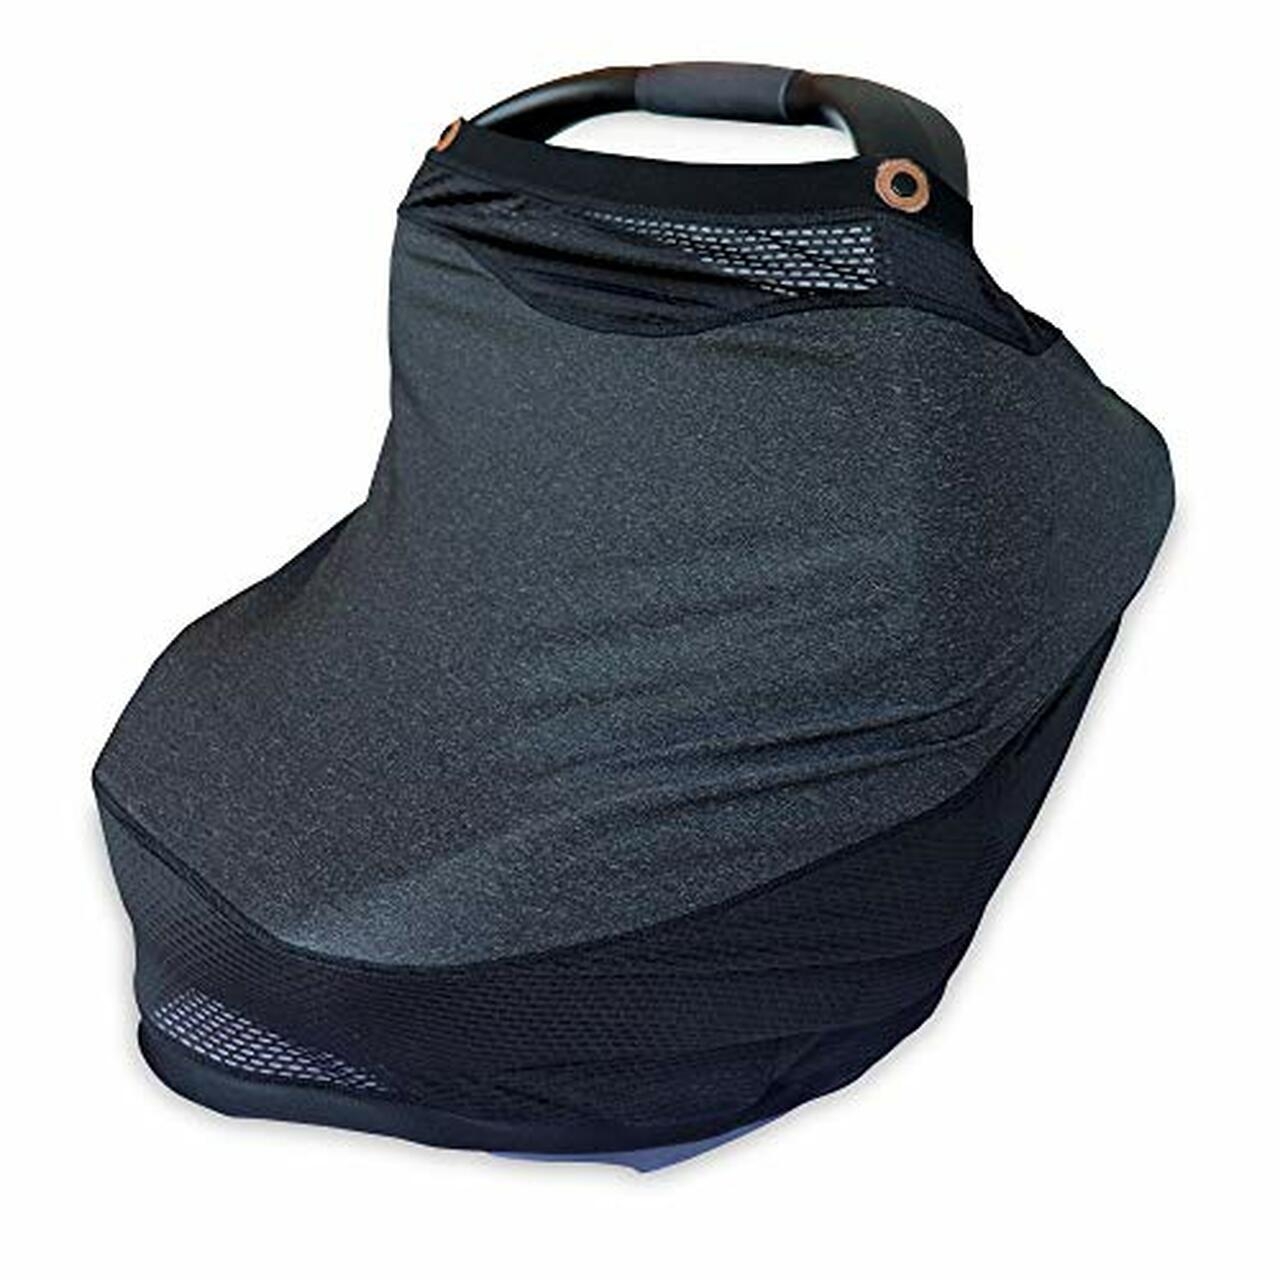 Chicco Boppy 4 & More Multi-Use Cover - Charcoal